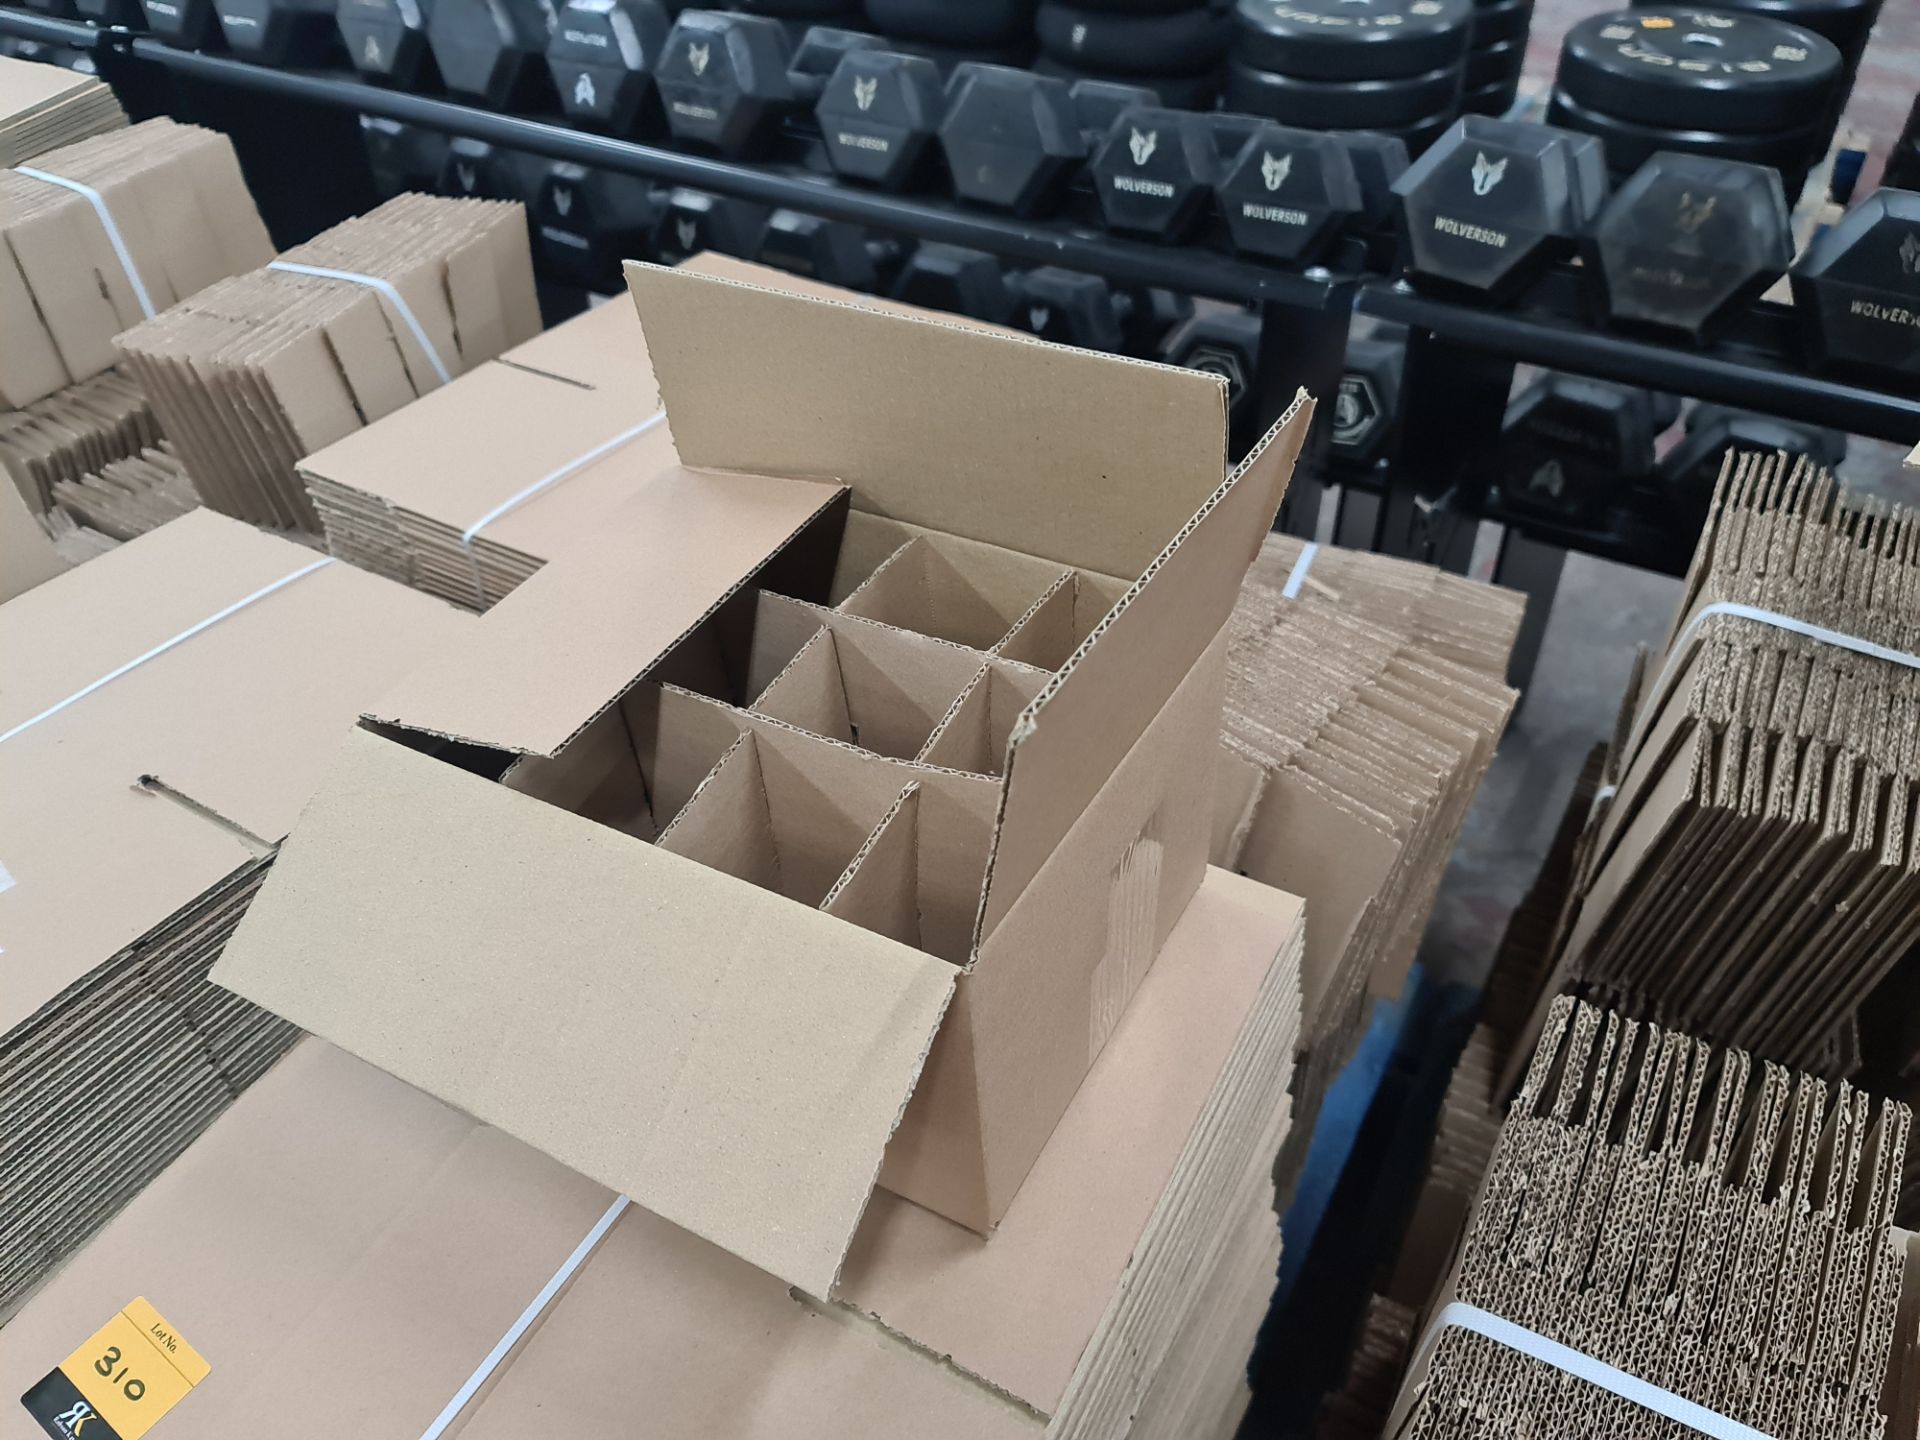 The contents of a pallet of cardboard boxes comprising approximately 300 boxes and 300 inserts in to